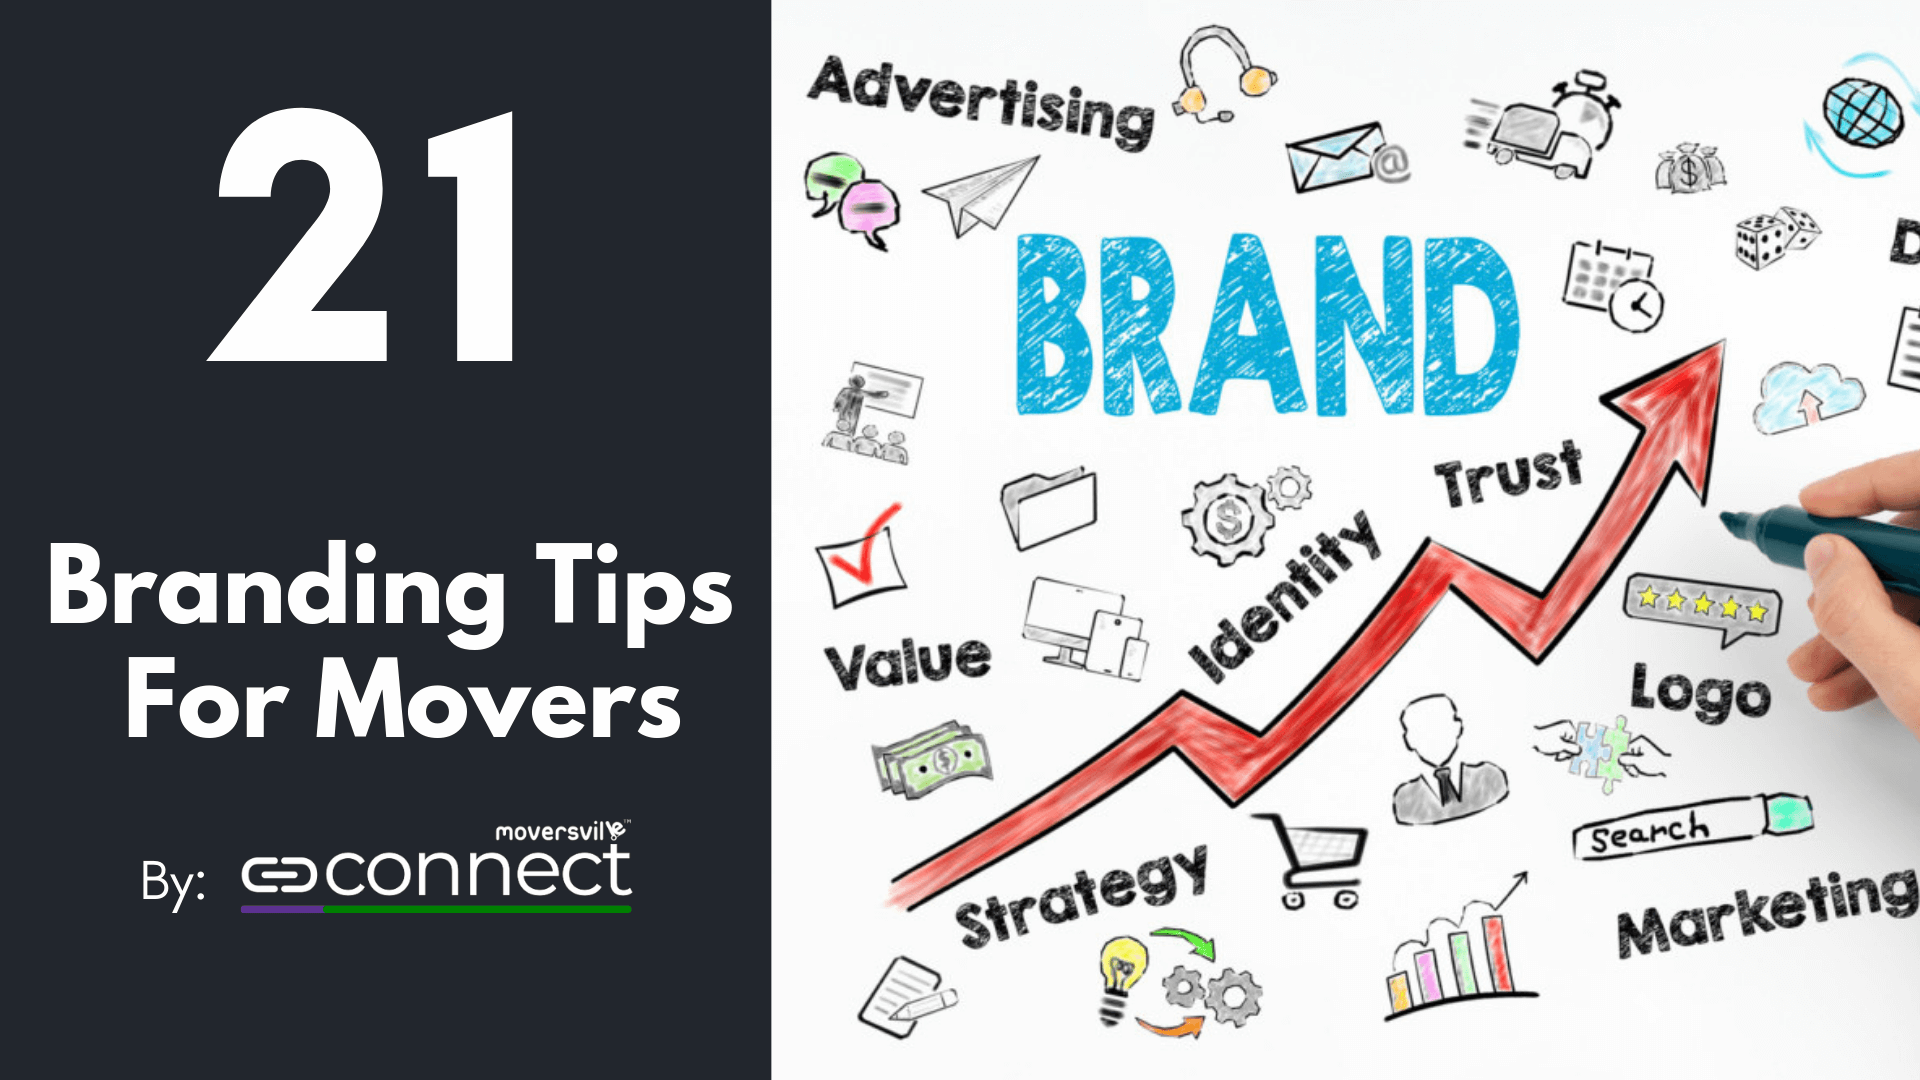 Branding Tips For Movers